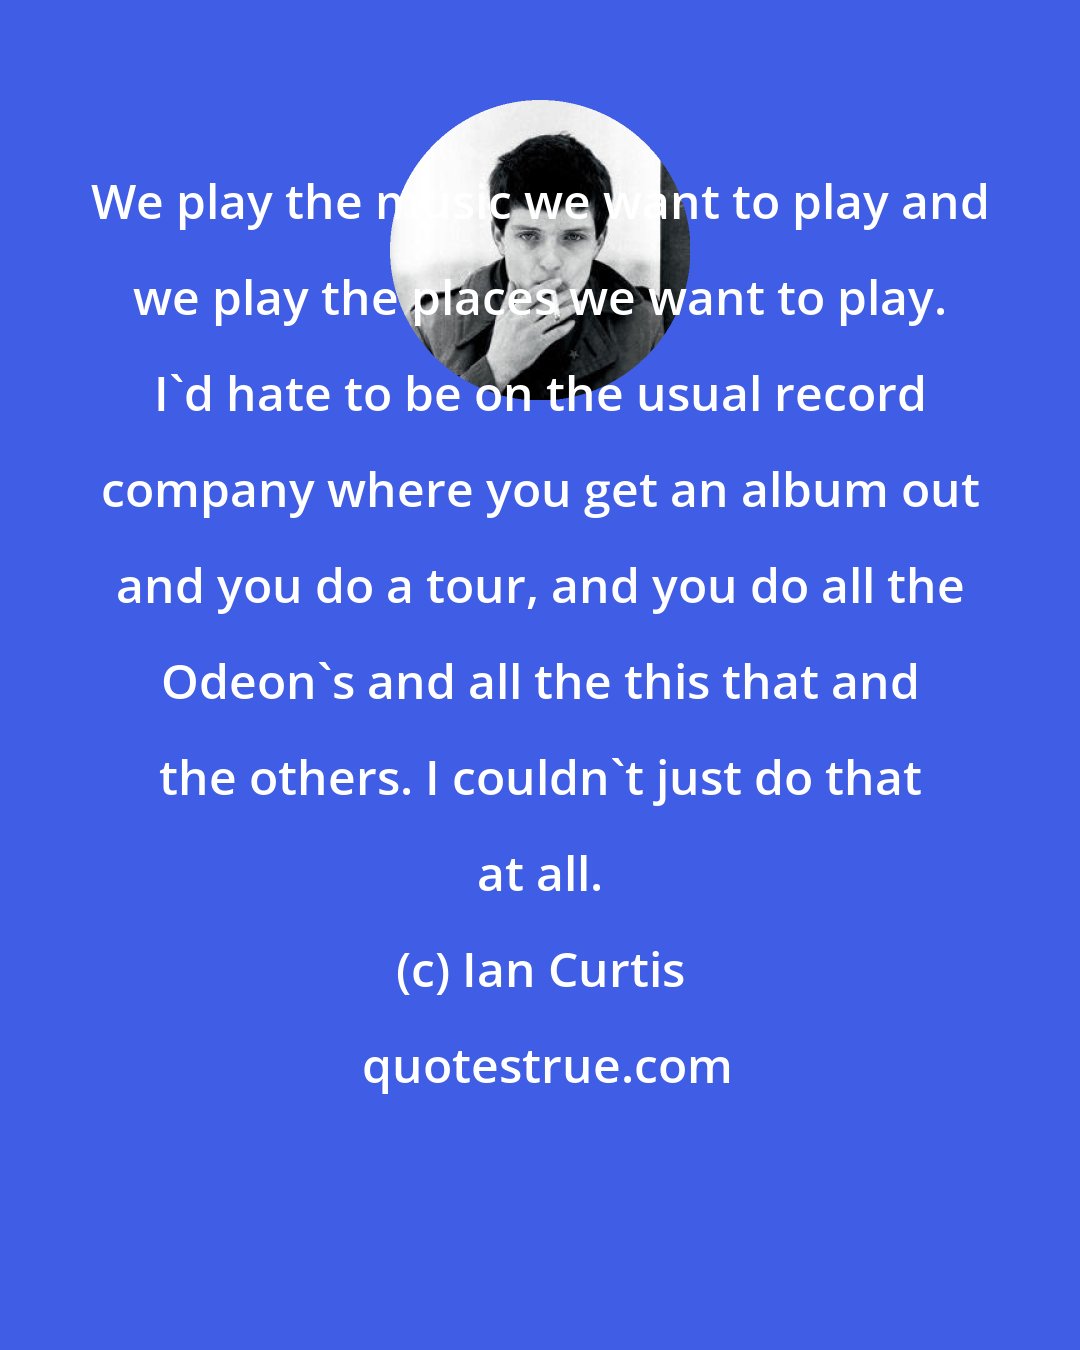 Ian Curtis: We play the music we want to play and we play the places we want to play. I'd hate to be on the usual record company where you get an album out and you do a tour, and you do all the Odeon's and all the this that and the others. I couldn't just do that at all.